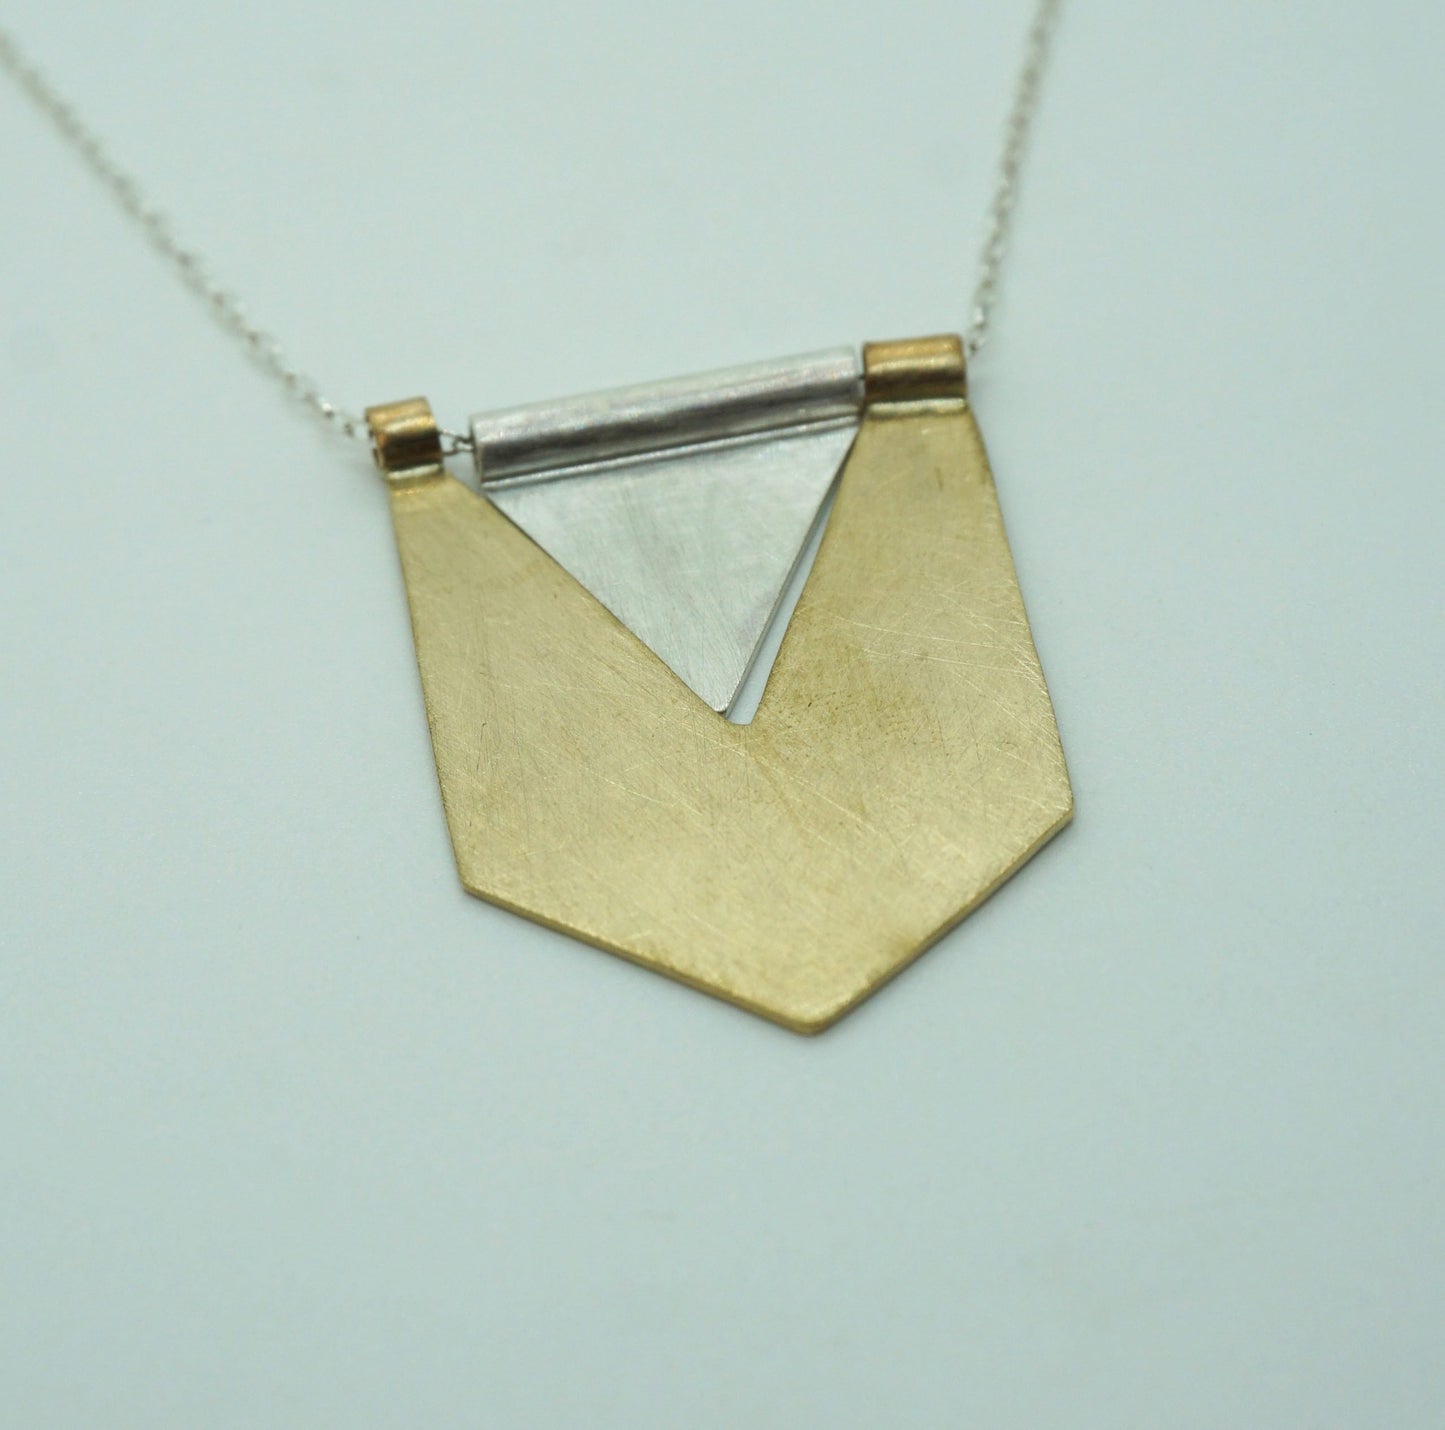 Gold and silver flag pendant necklace